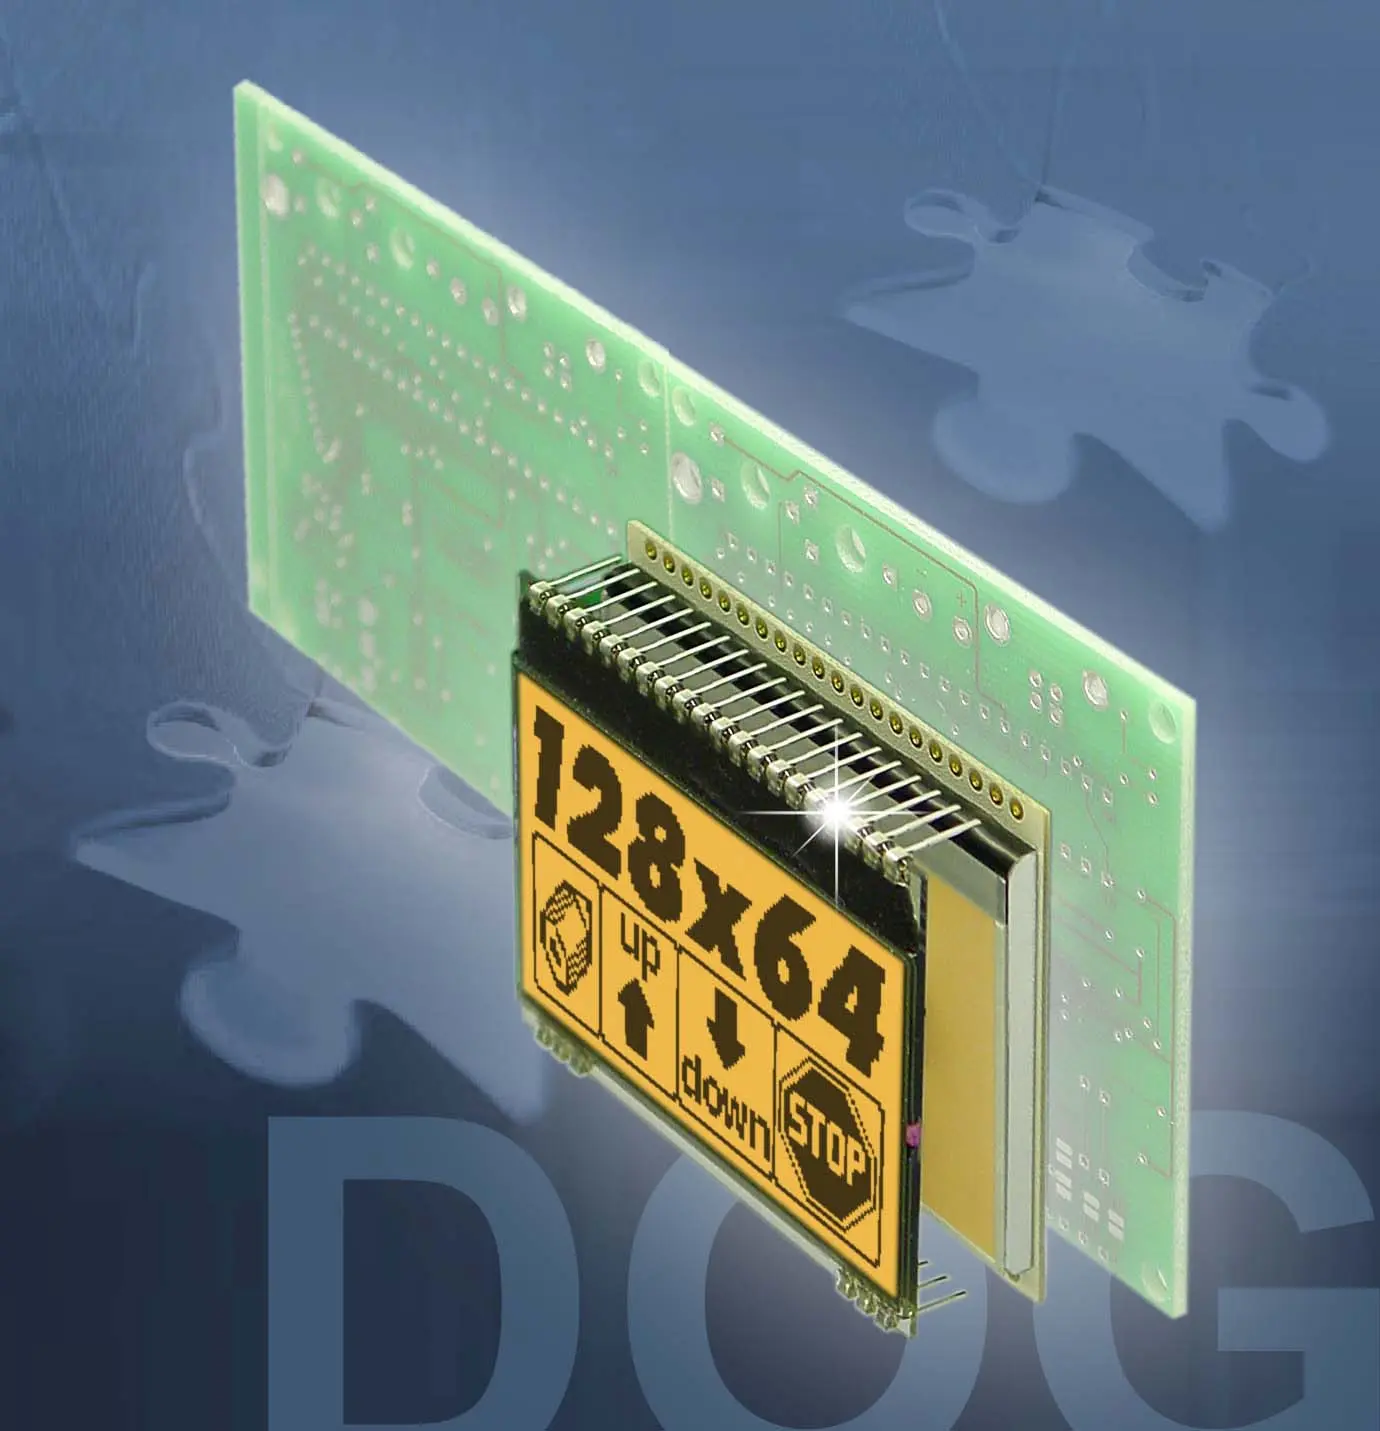 PI DOG board module from Display Visions now available at Bürklin Elektronik